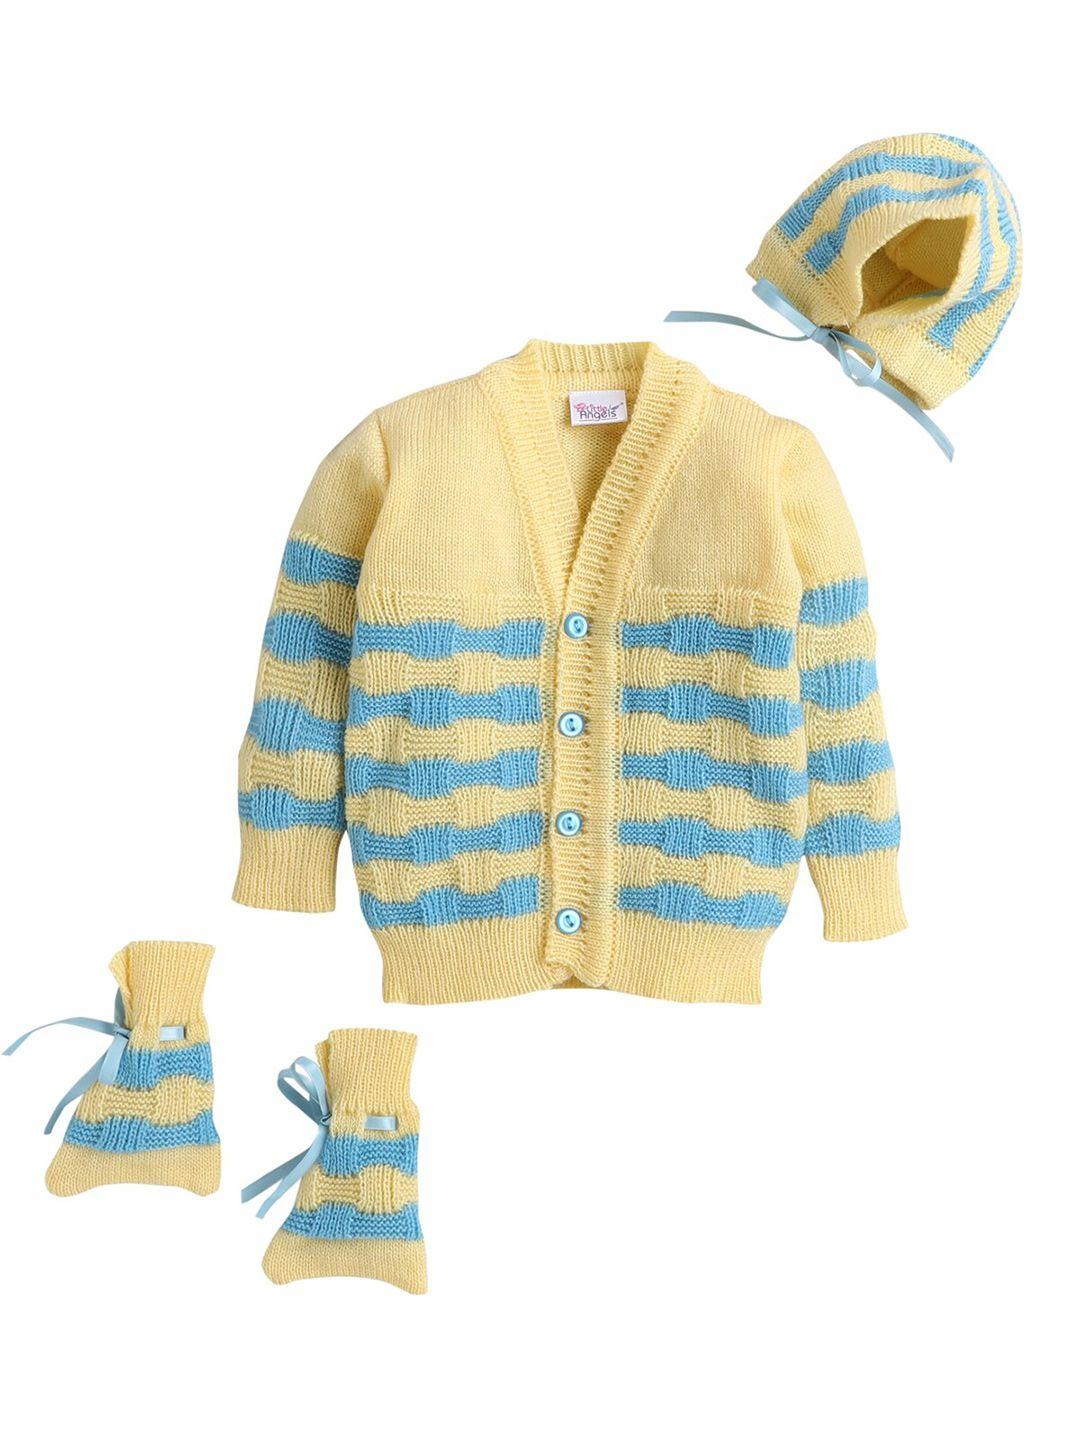 little angels unisex kids yellow & blue striped cardigan matching cap and socks